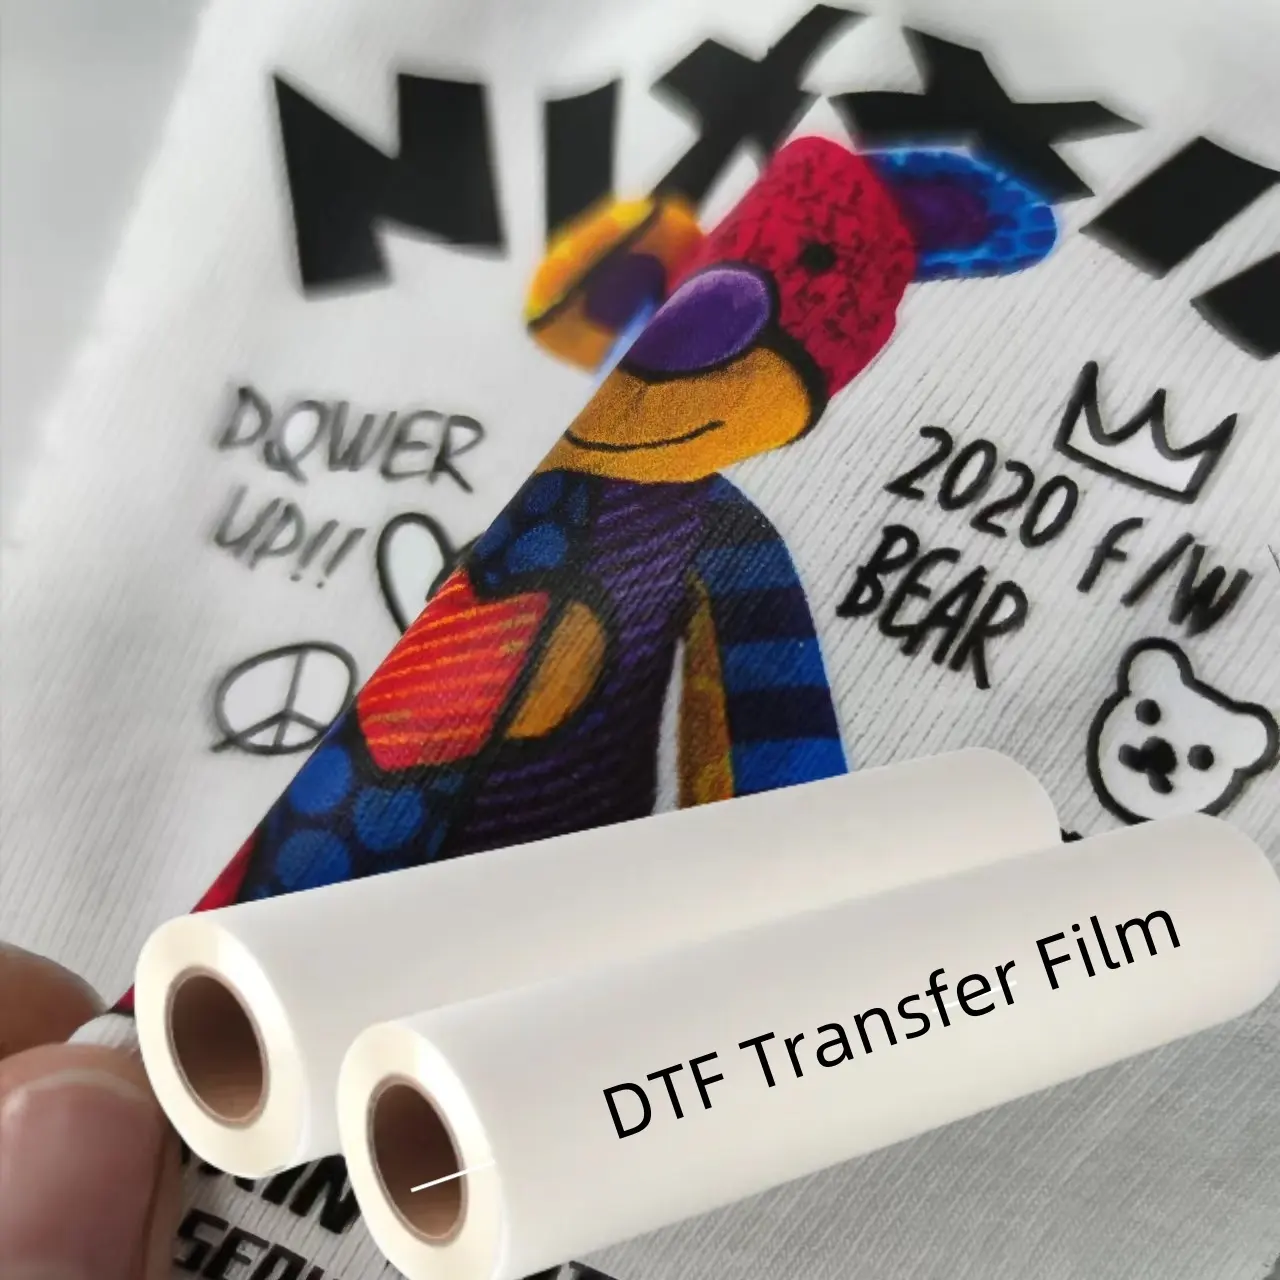 dtf transfers designs ready to press transfer paper film for fabric printer